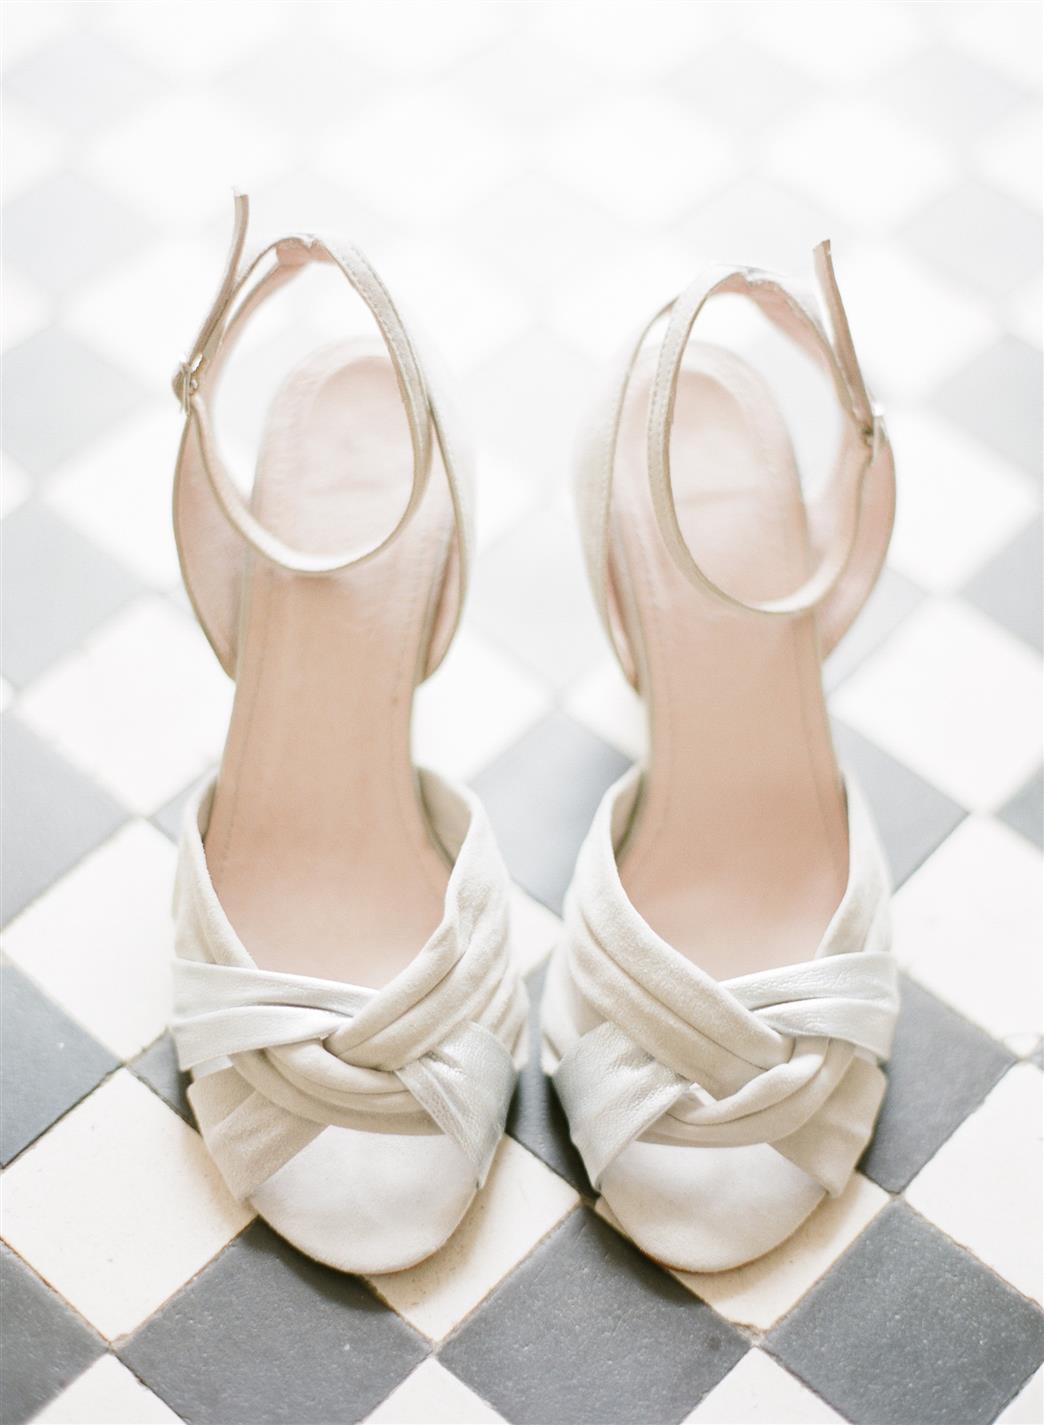 Bridal Shoes - A 1940s Wedding Dress for a Sweet Early Summer Wedding from Taylor & Porter Photography